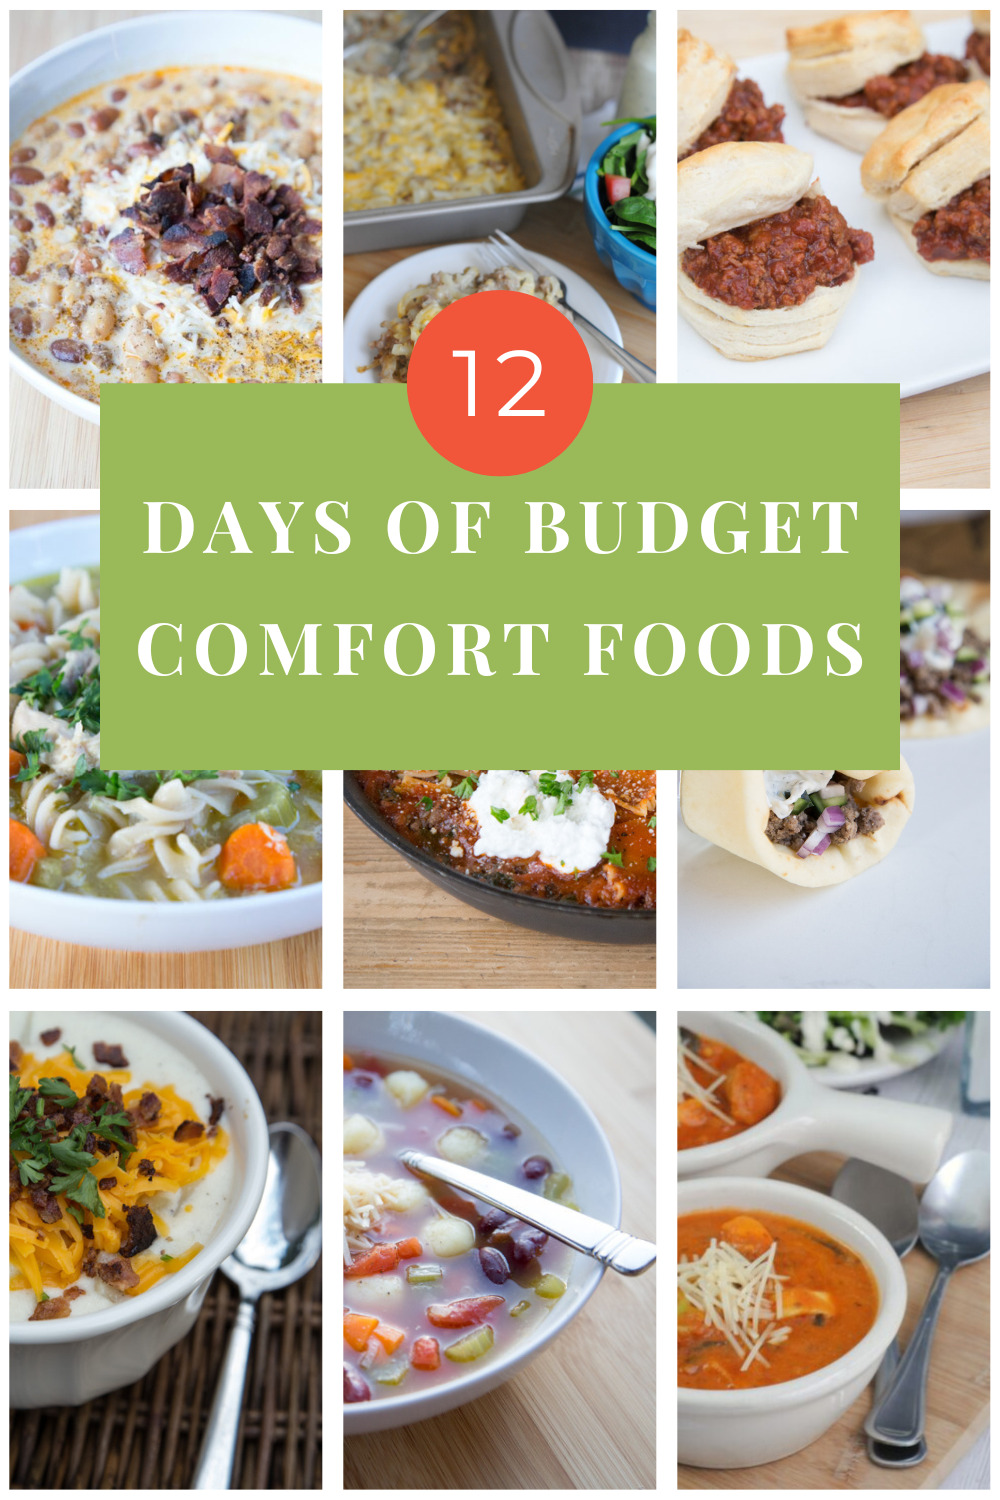 12 days of inexpensive home cooking